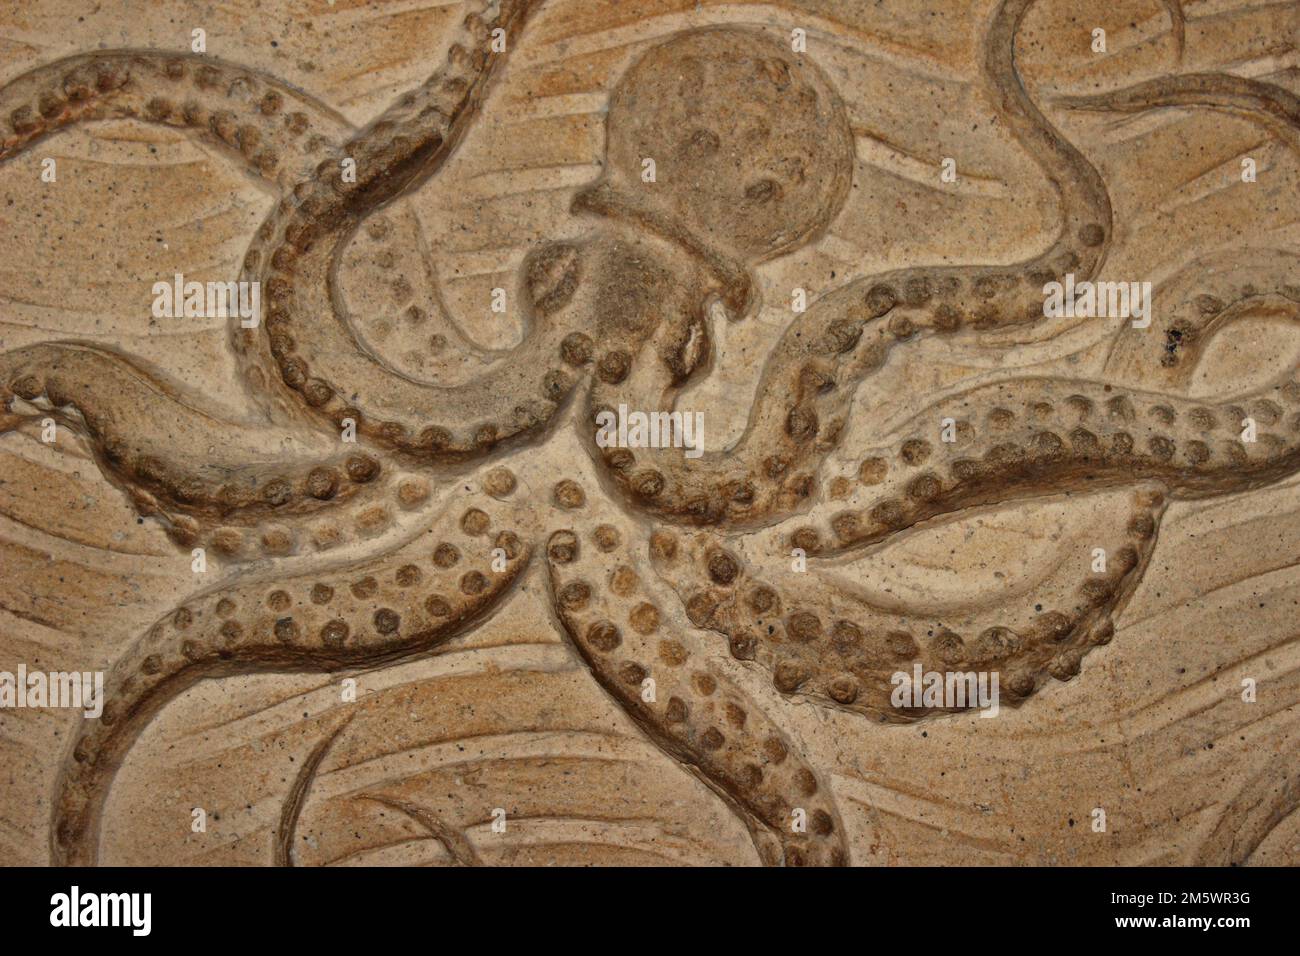 Octopus Stone Carving im Londoner Natural History Museum Stockfoto